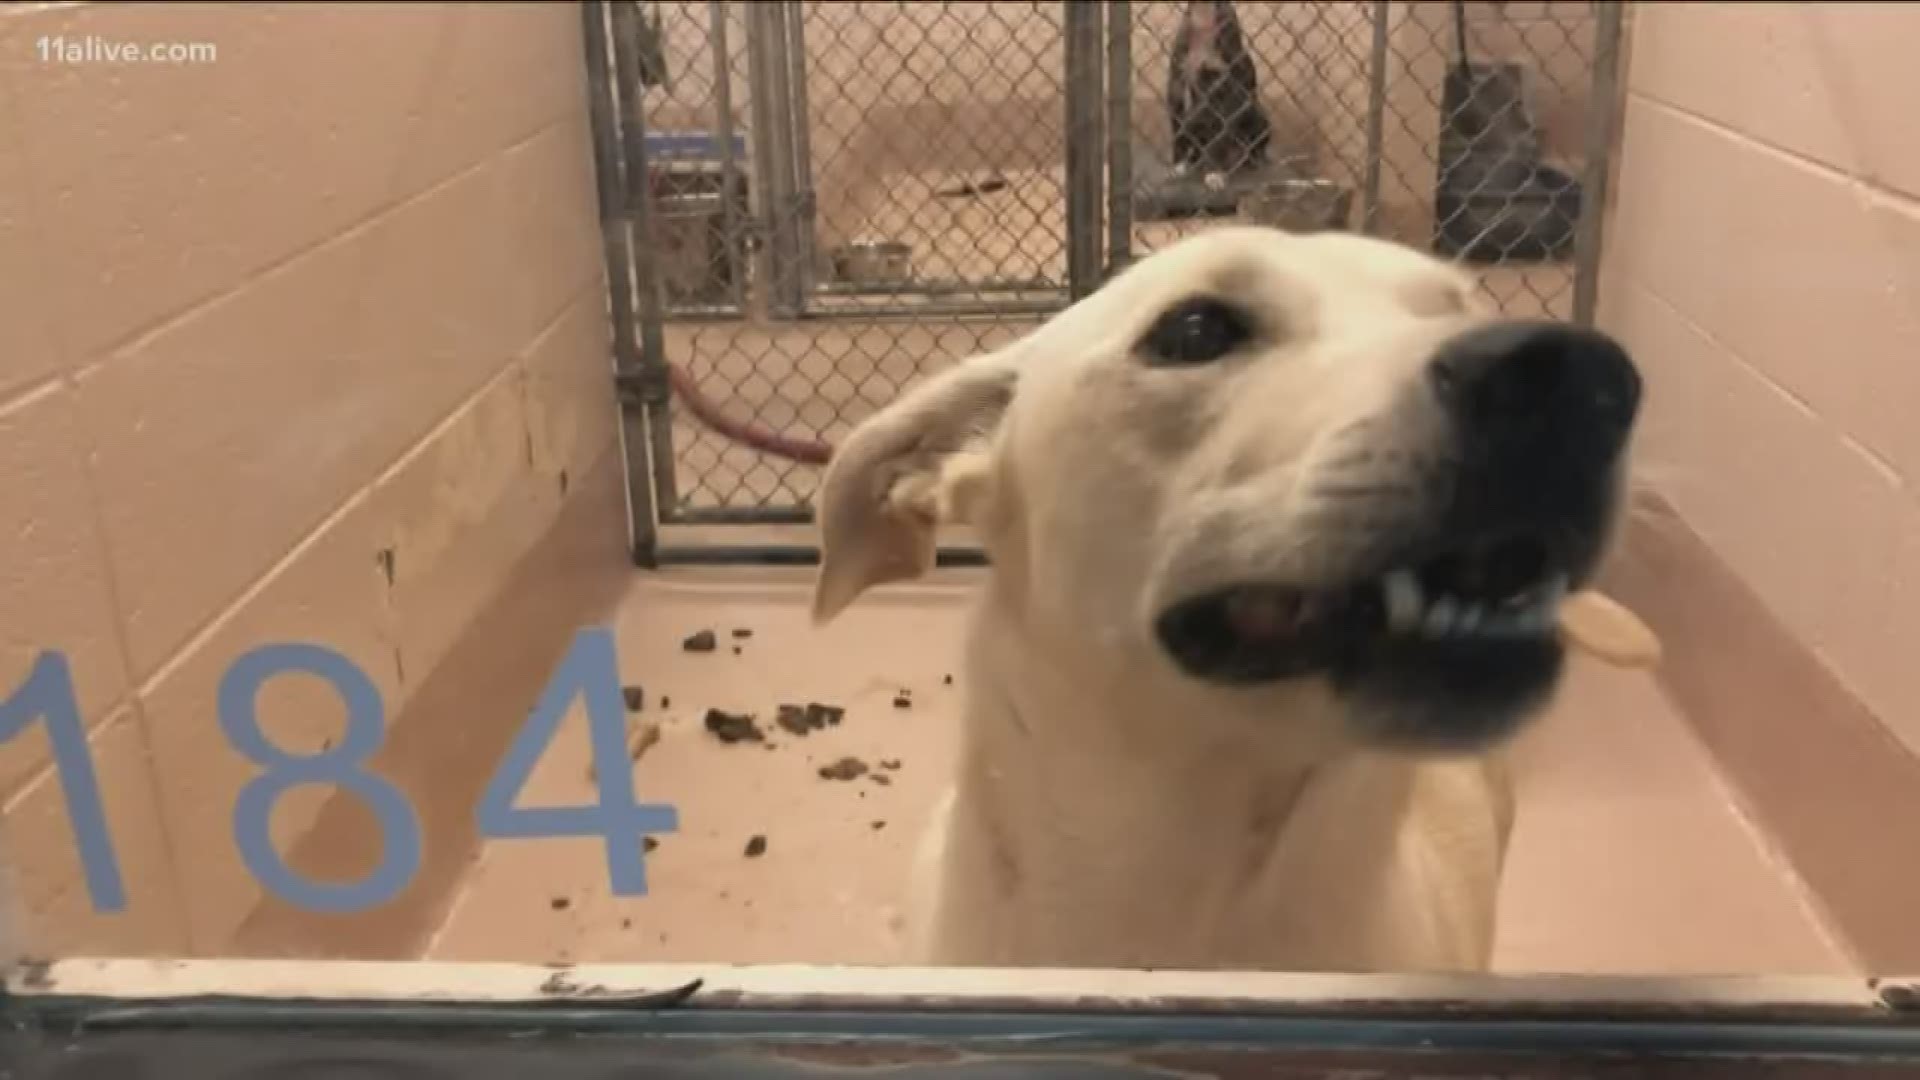 The Gwinnett County Animals Shelter is helping Chatham County with animal care in the event of evacuations from coastal areas of Georgia ahead of Hurricane Dorian.